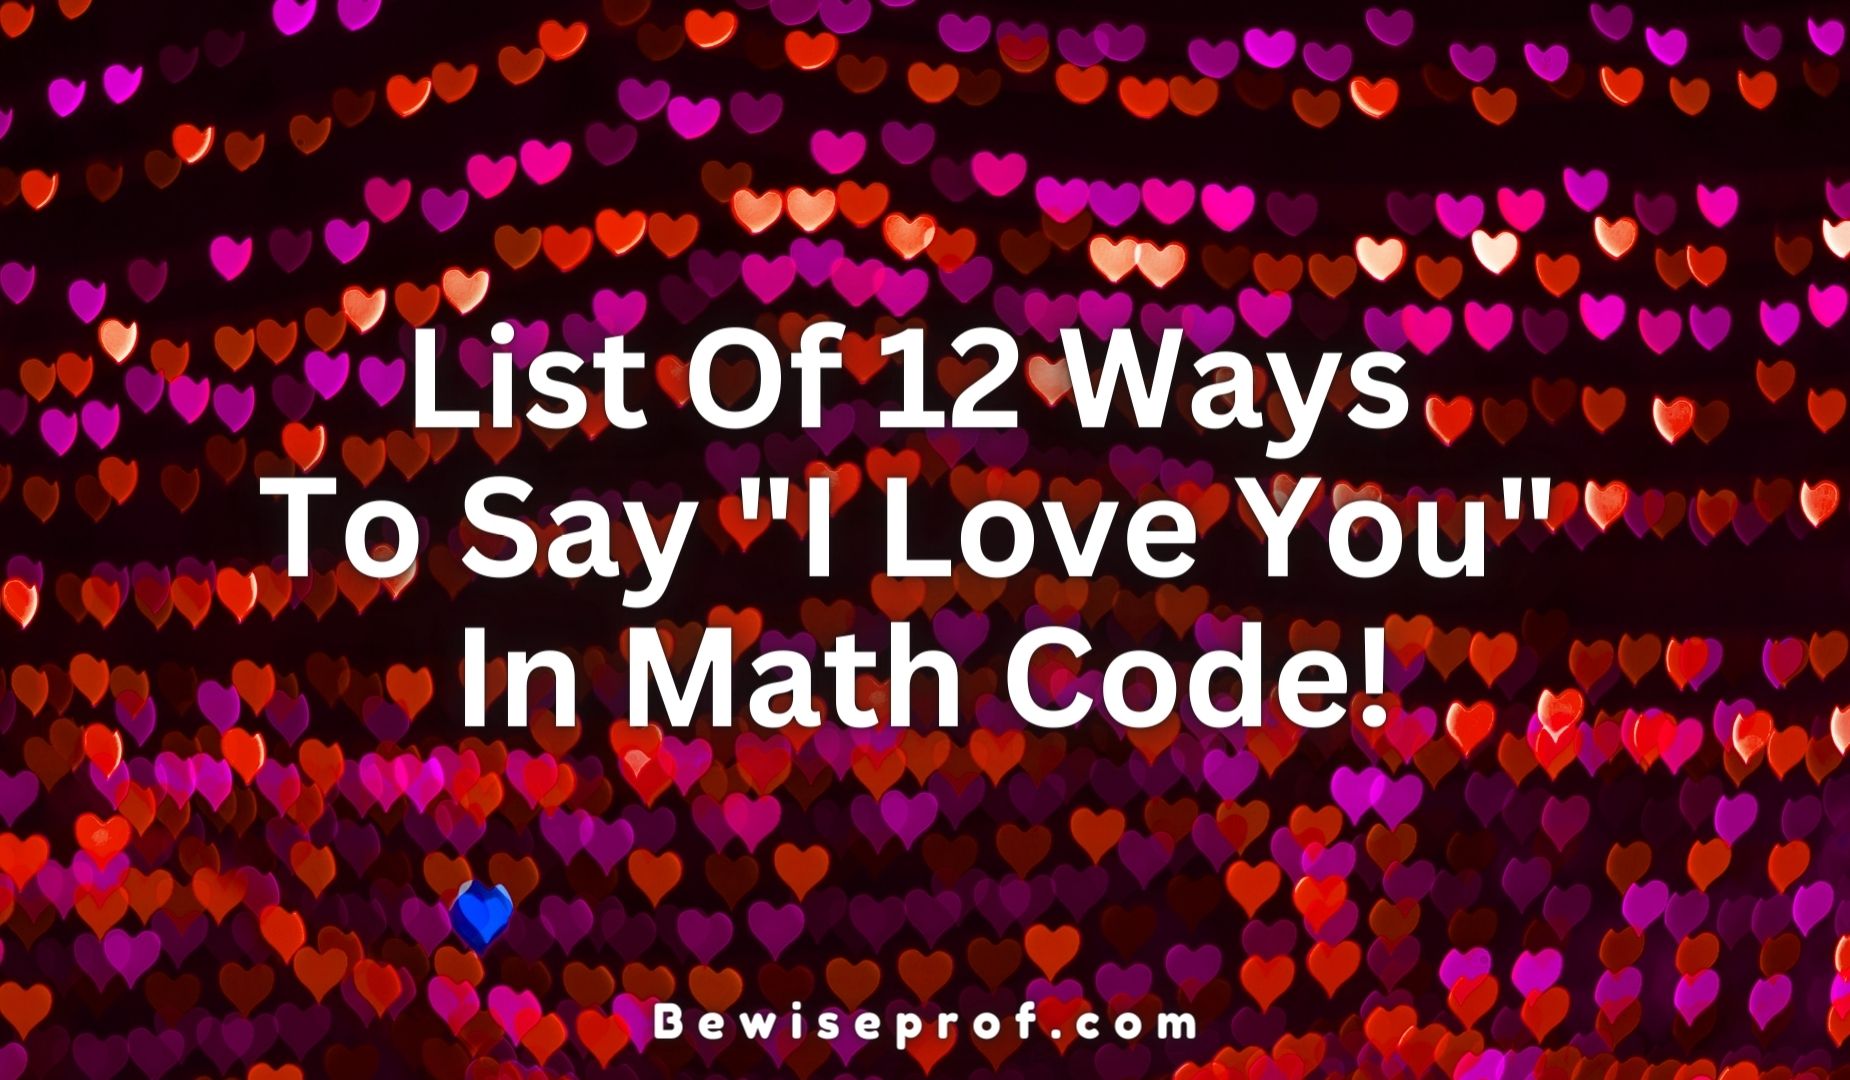 List Of 12 Ways To Say "I Love You" In Math Code!